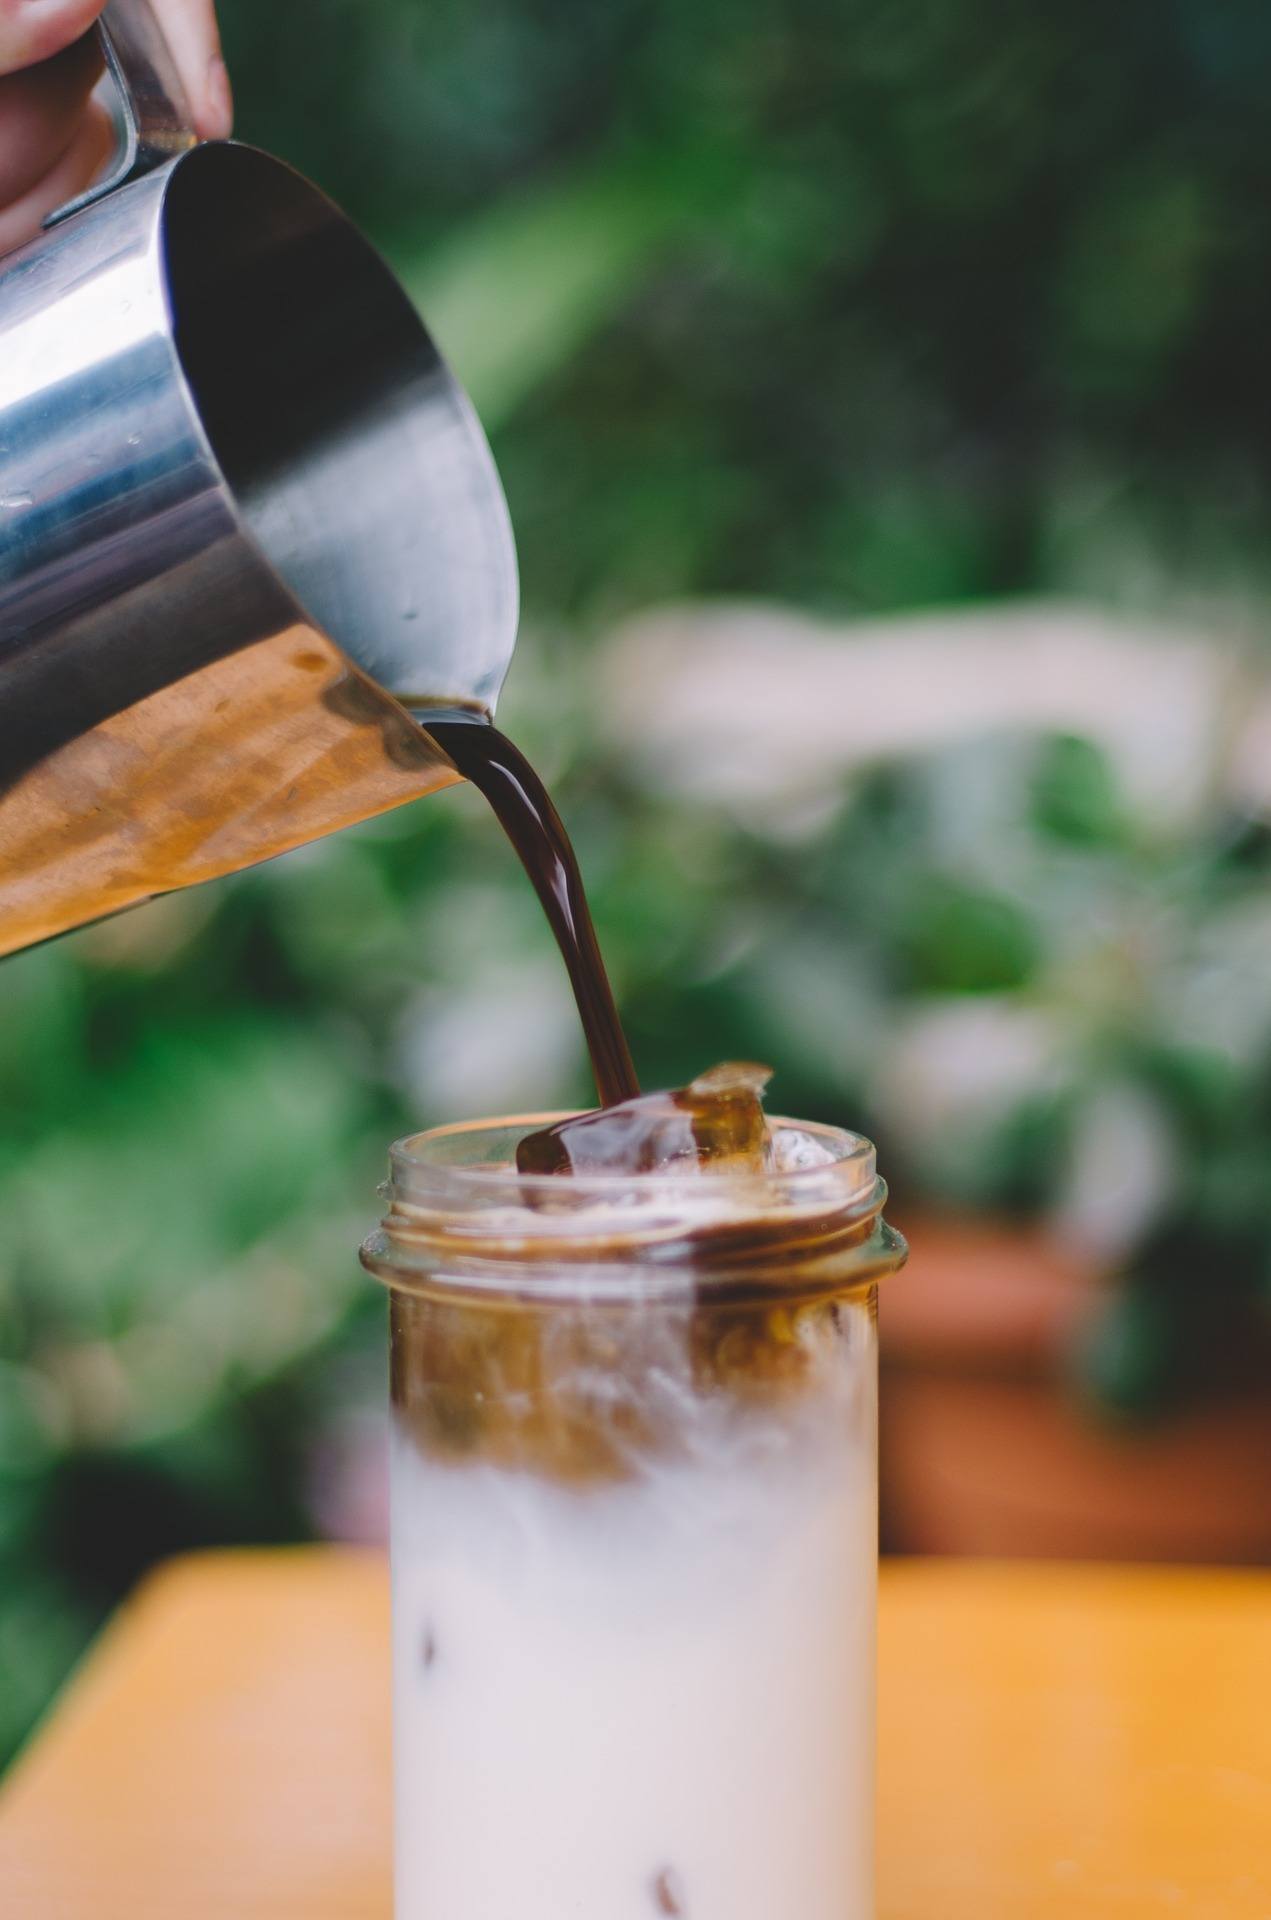 Mix Cold Brew With Milk for a Tasty Treat